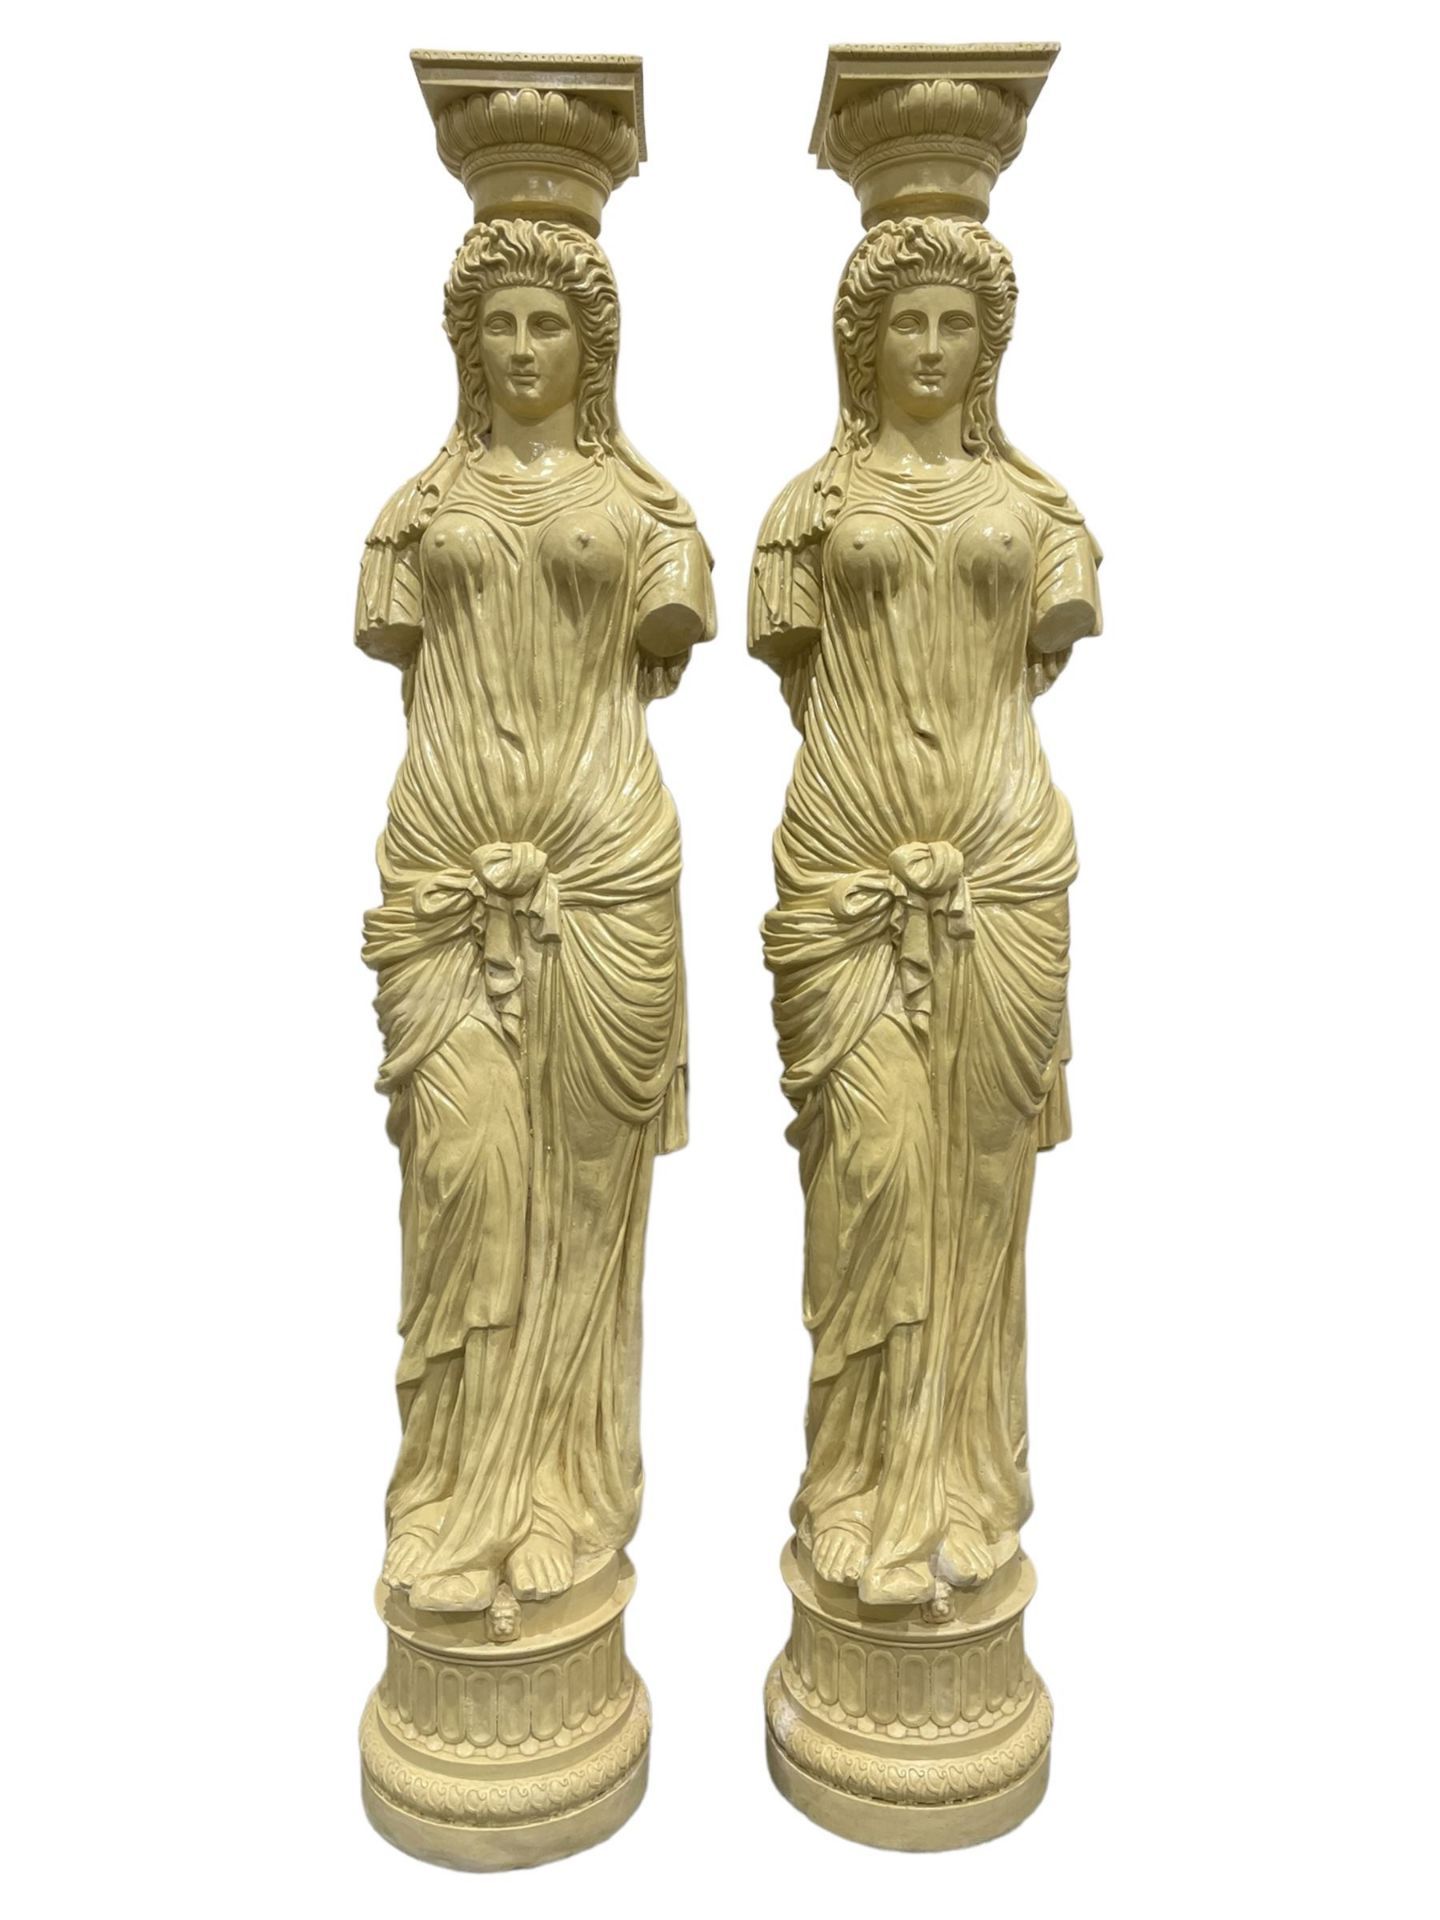 A Pair Of Greek Style Caryatid Columns As an architectural support for an entablature on the head of